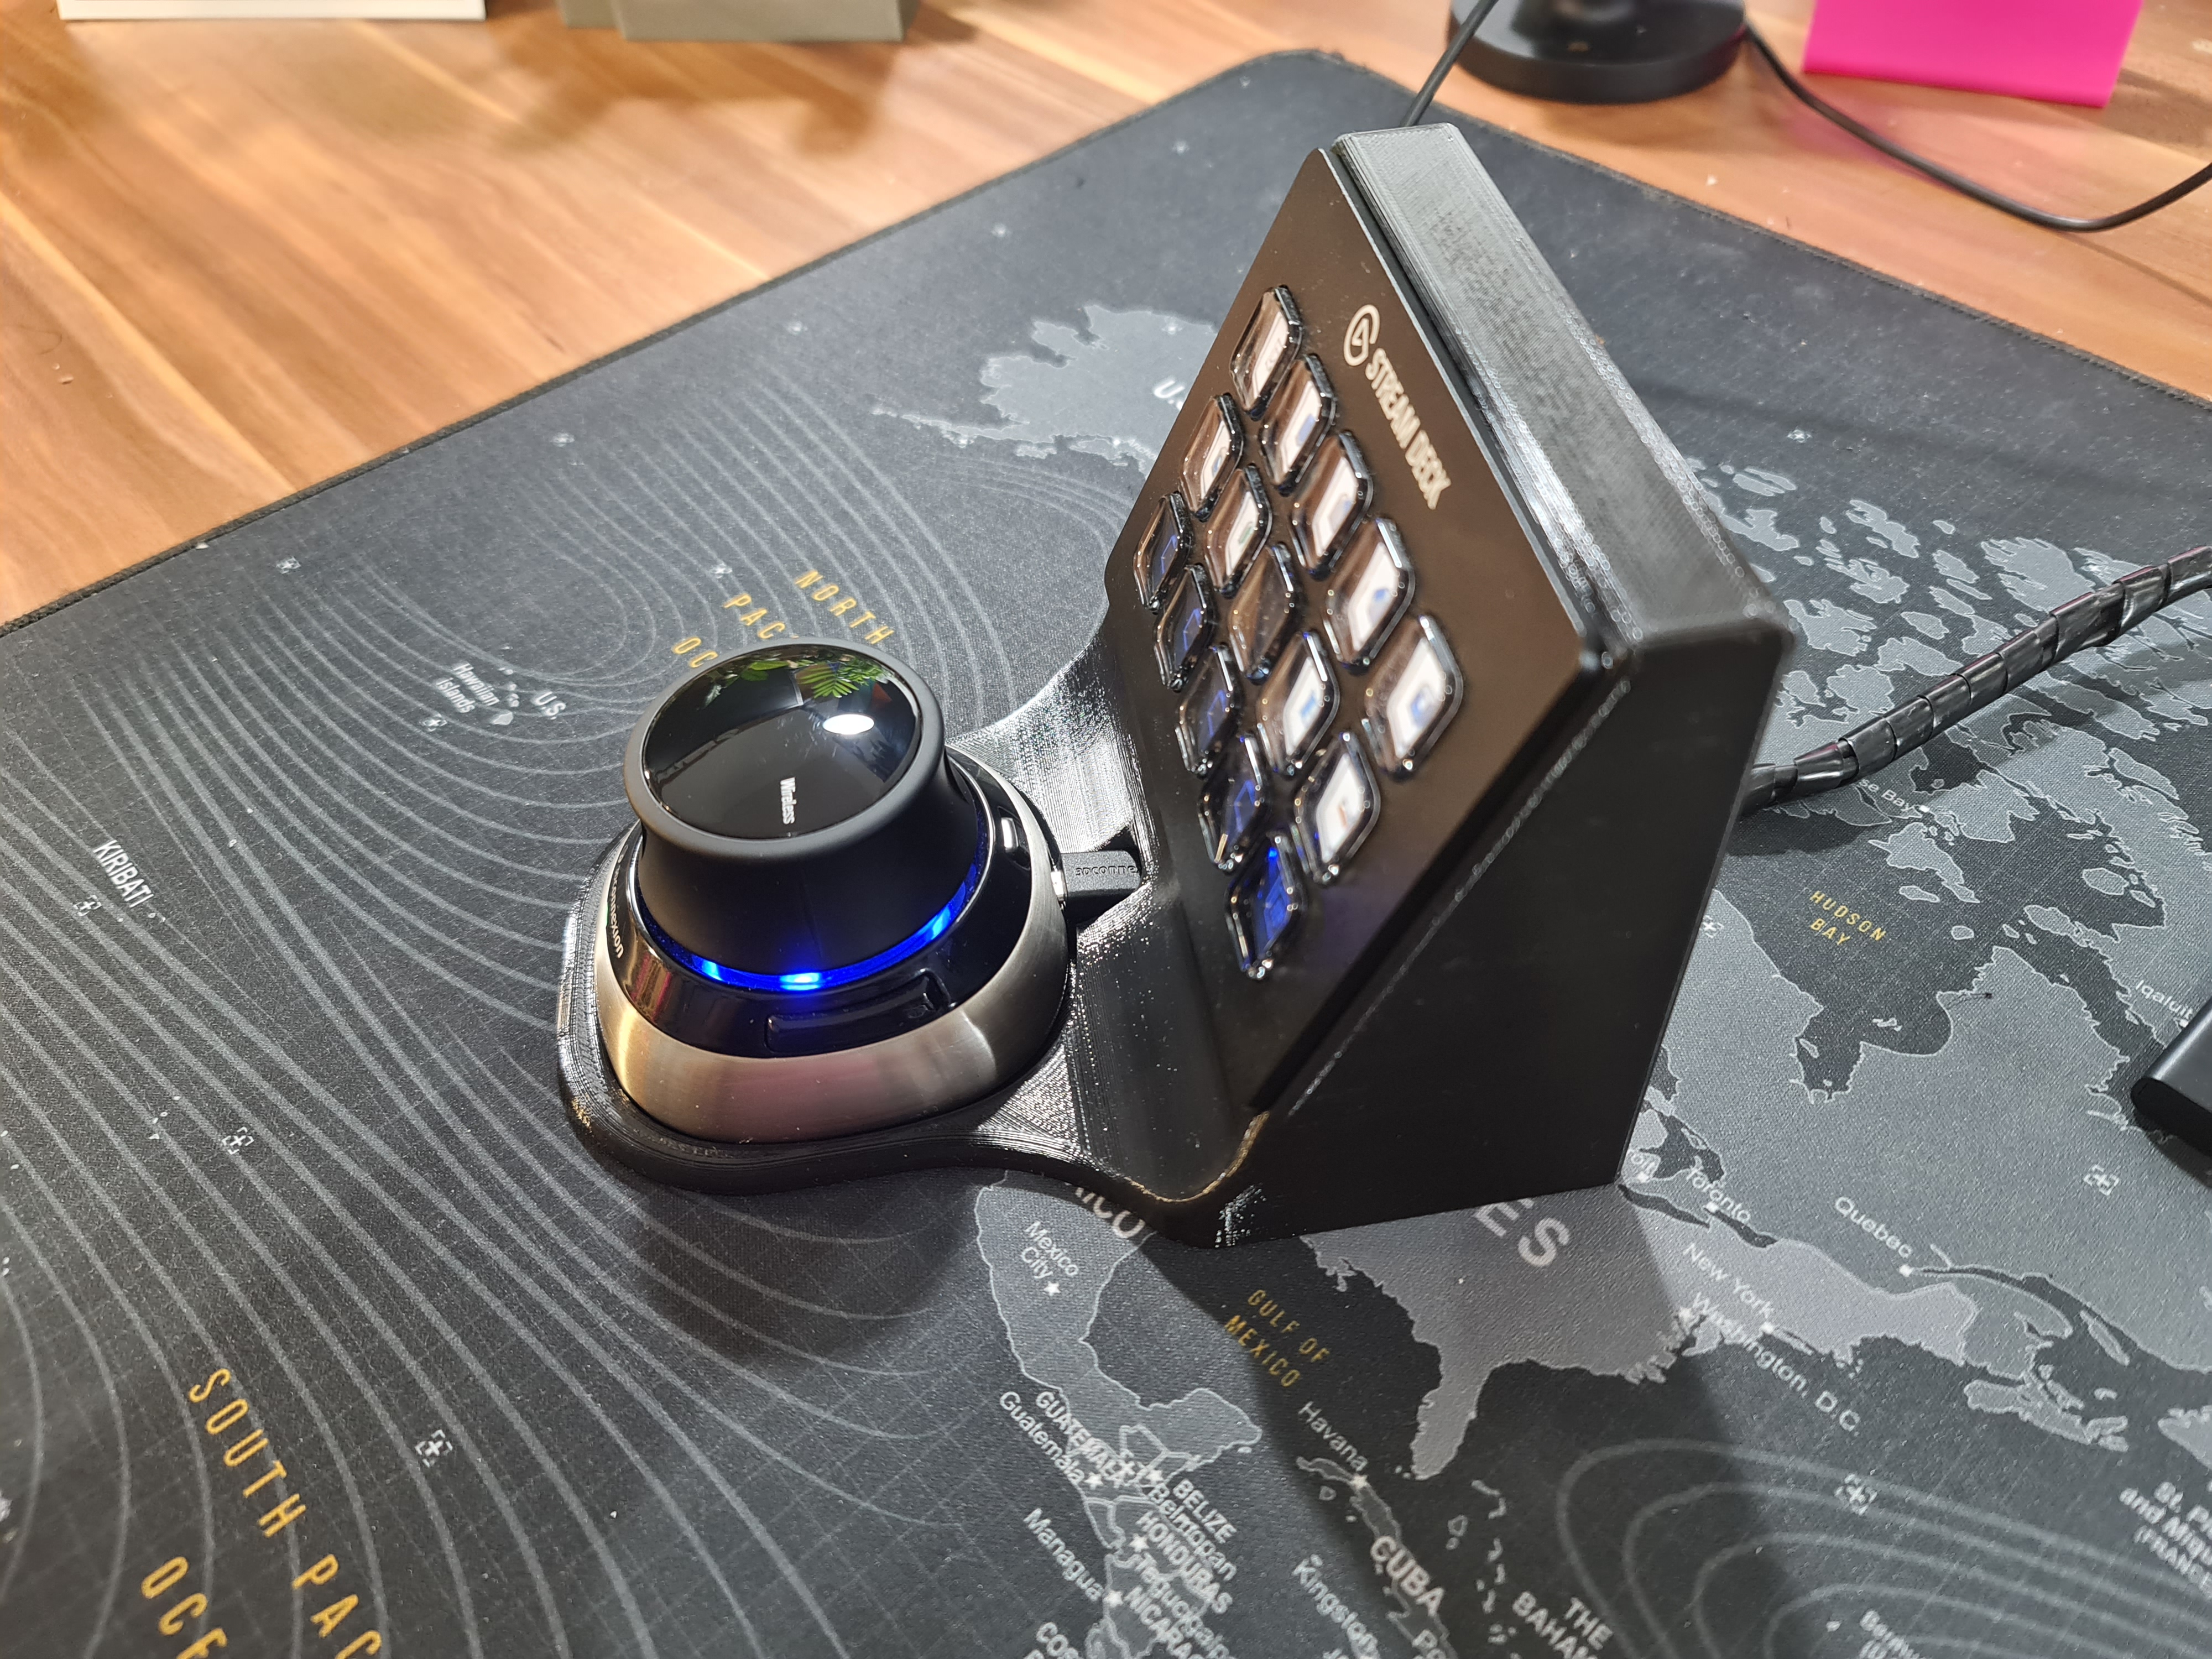 Spacemouse + Streamdeck mount